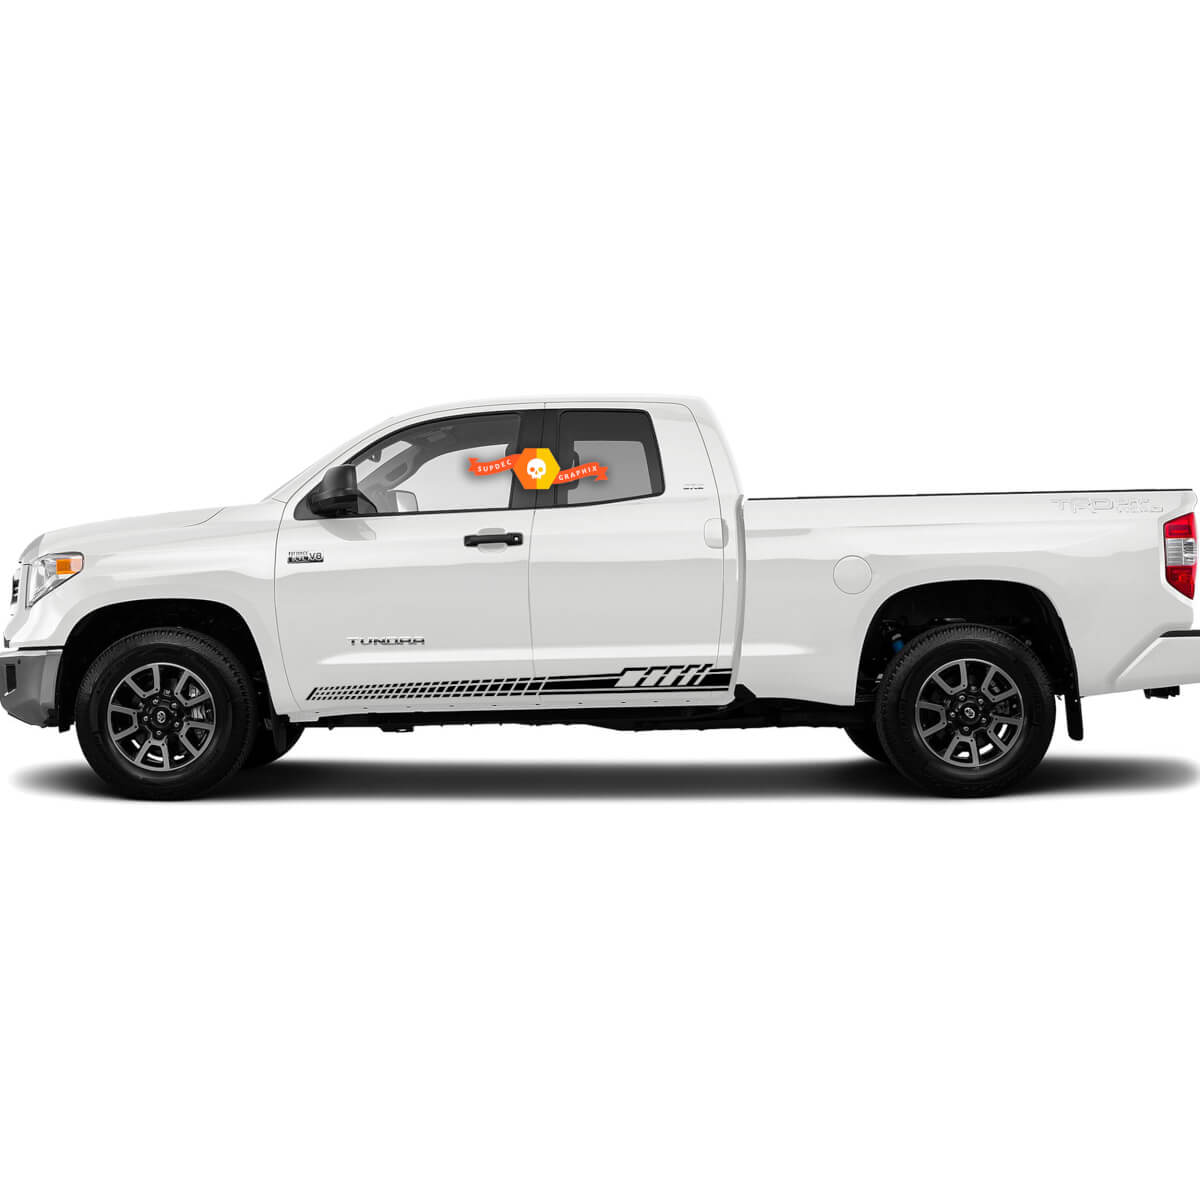 Car Decal Graphic Sticker Side Stripe Kit For Toyota Tundra